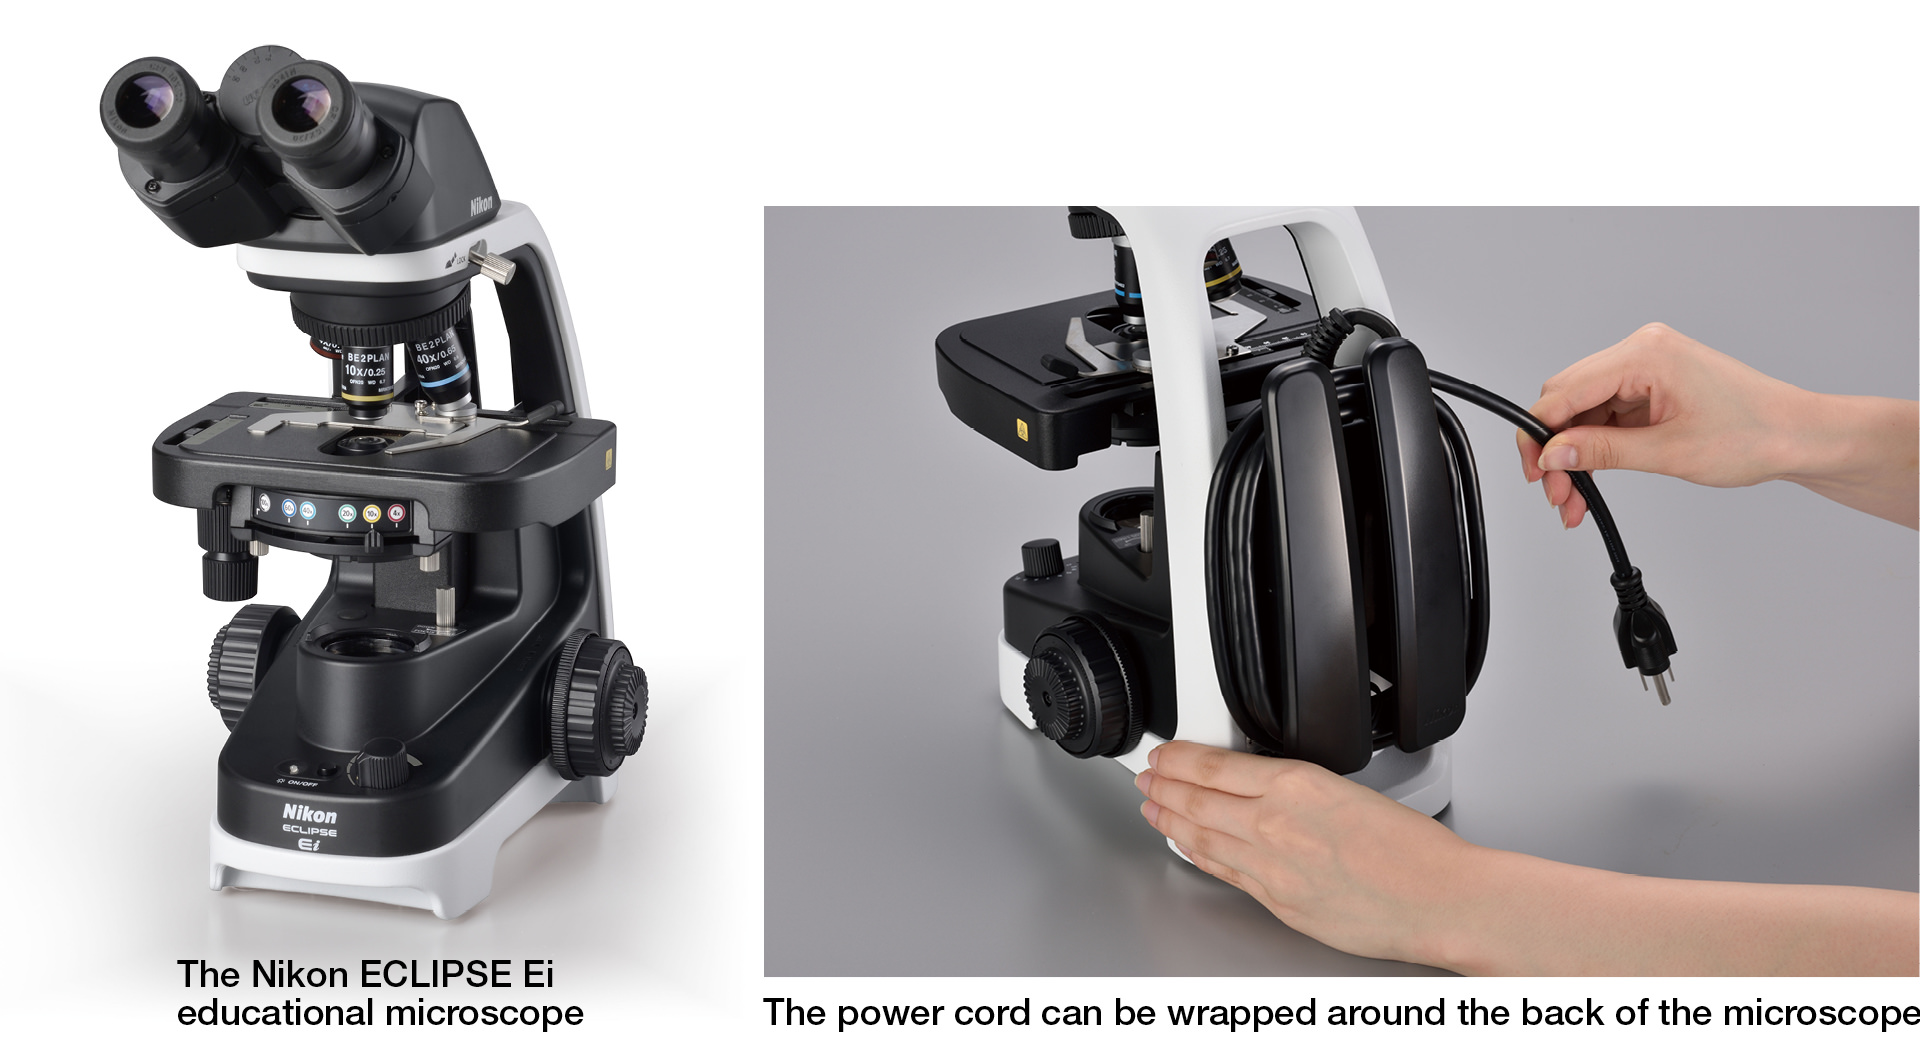 The Nikon ECLIPSE Ei educational microscope/The power cord can be wrapped around the back of the microscope